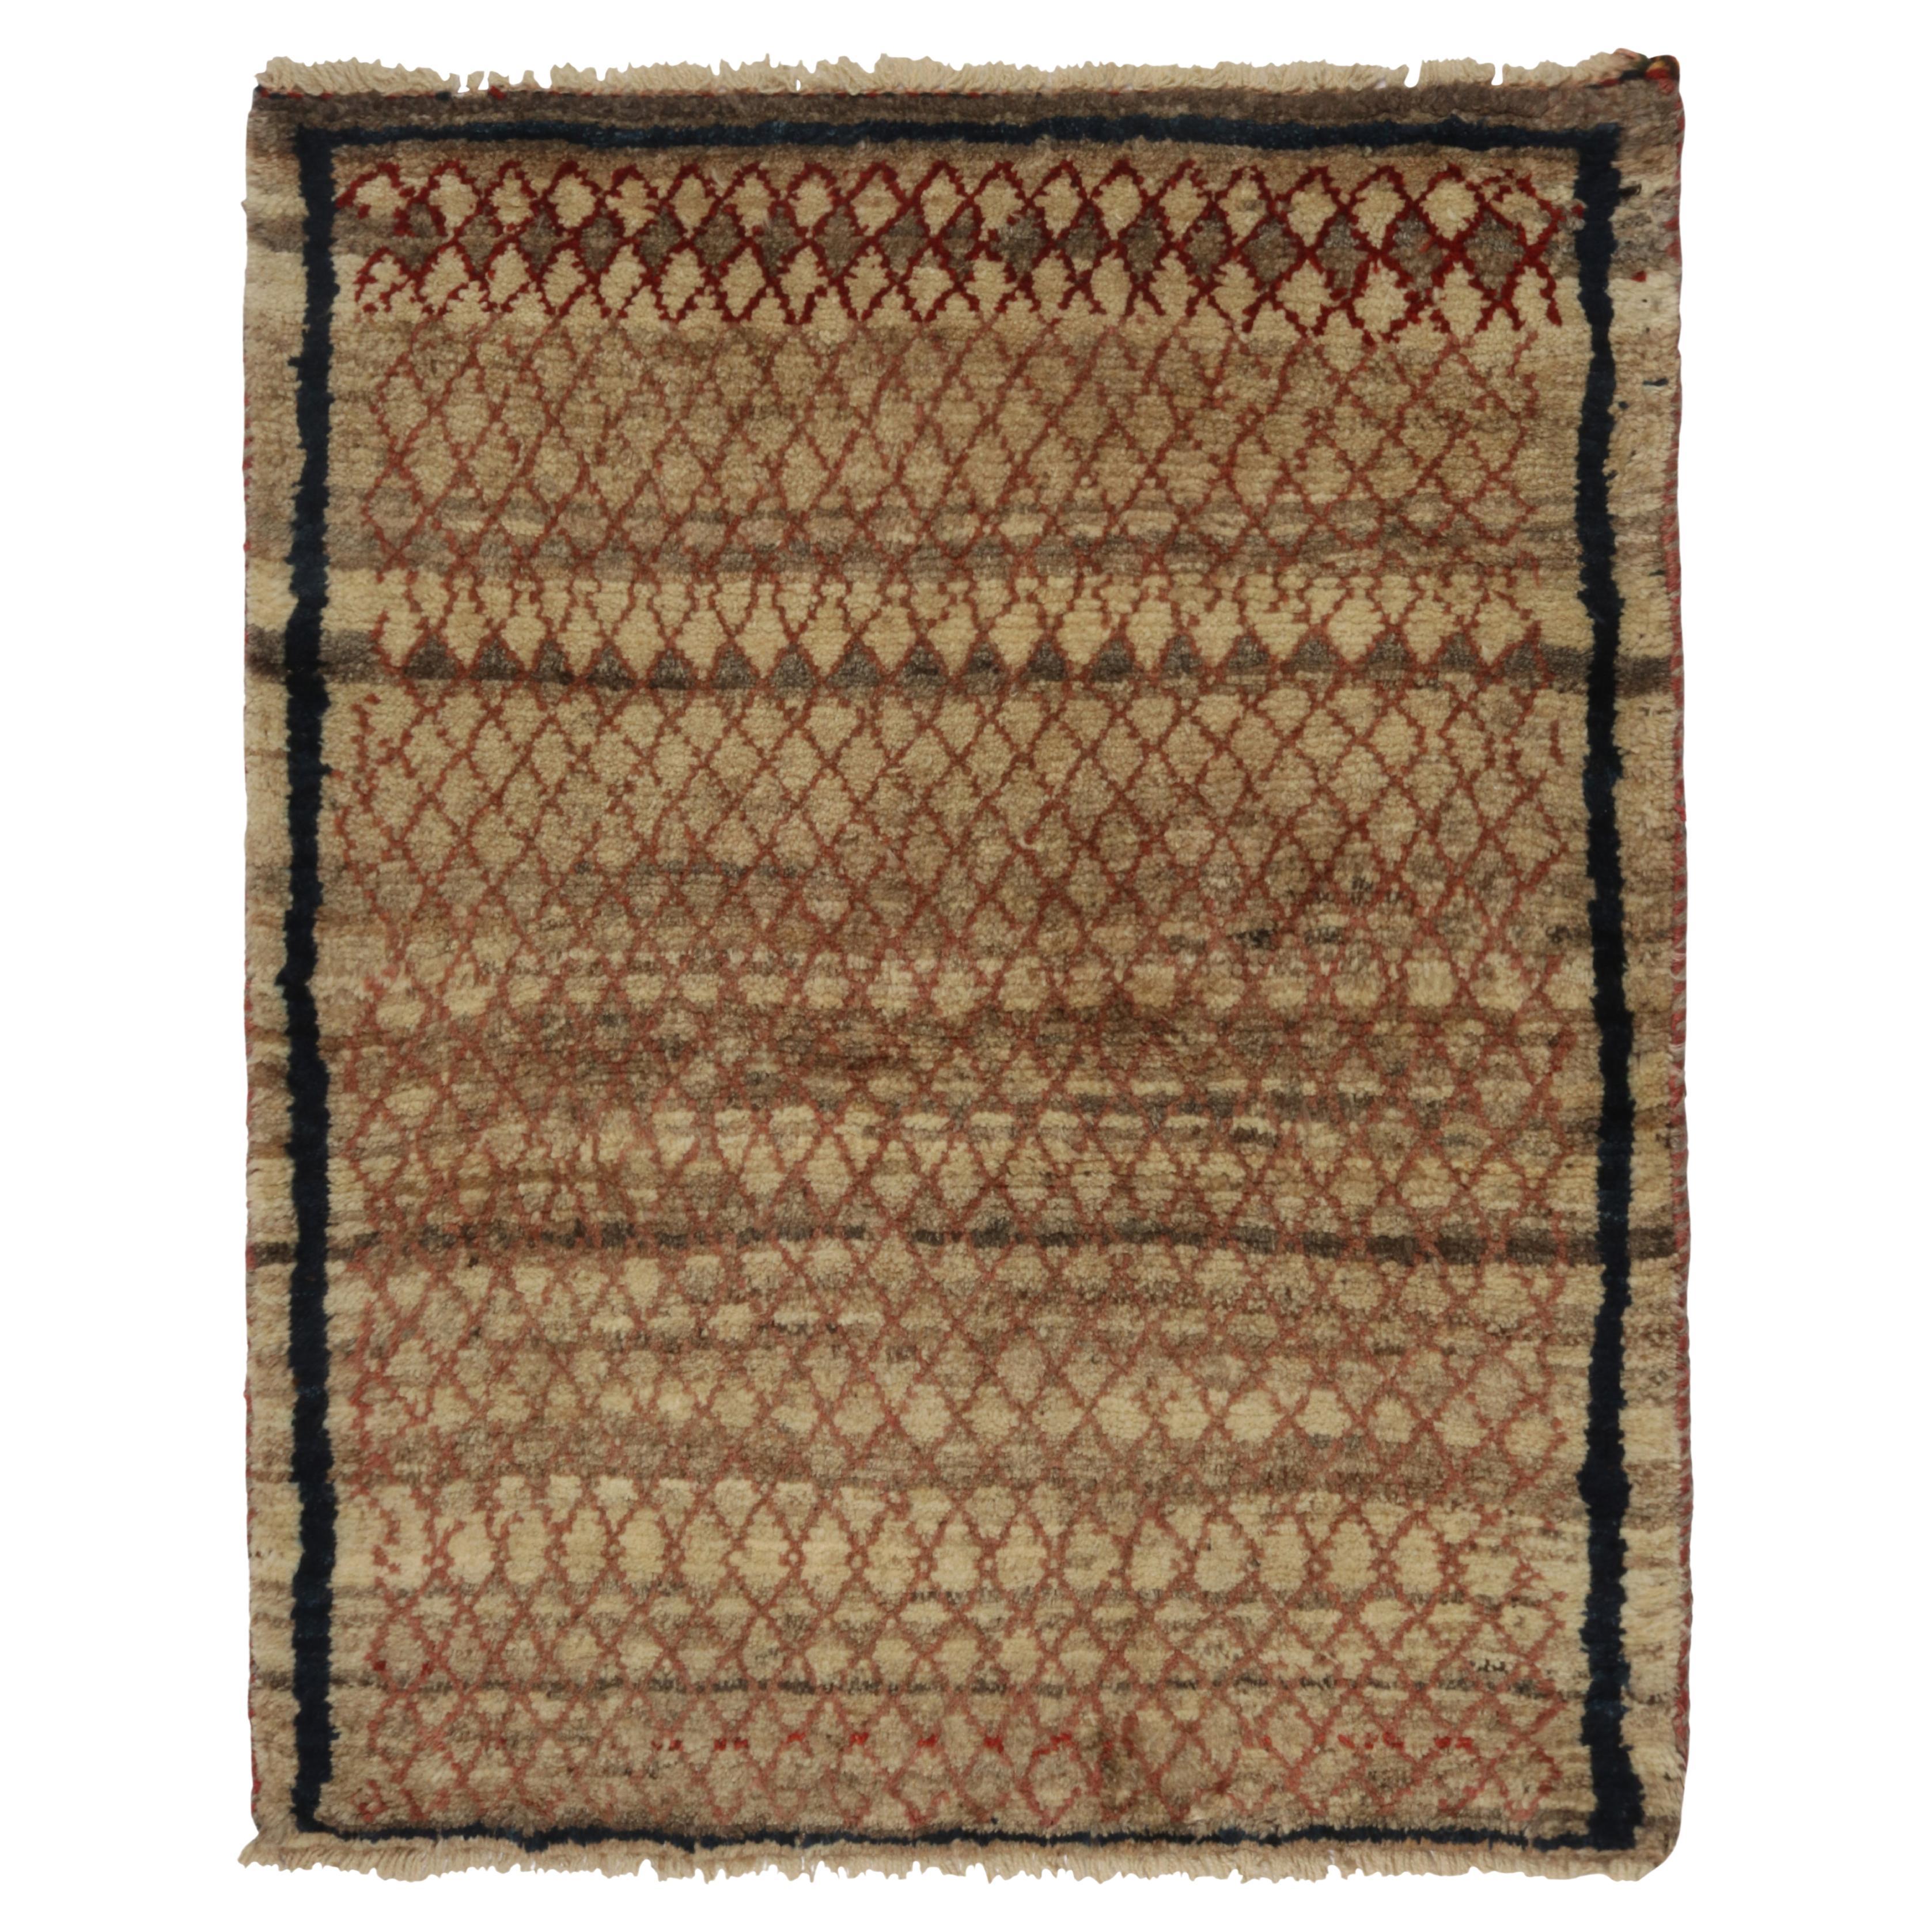 Vintage Gabbeh Tribal Rug in Beige-Brown with Red Lattice Pattern by Rug & Kilim For Sale